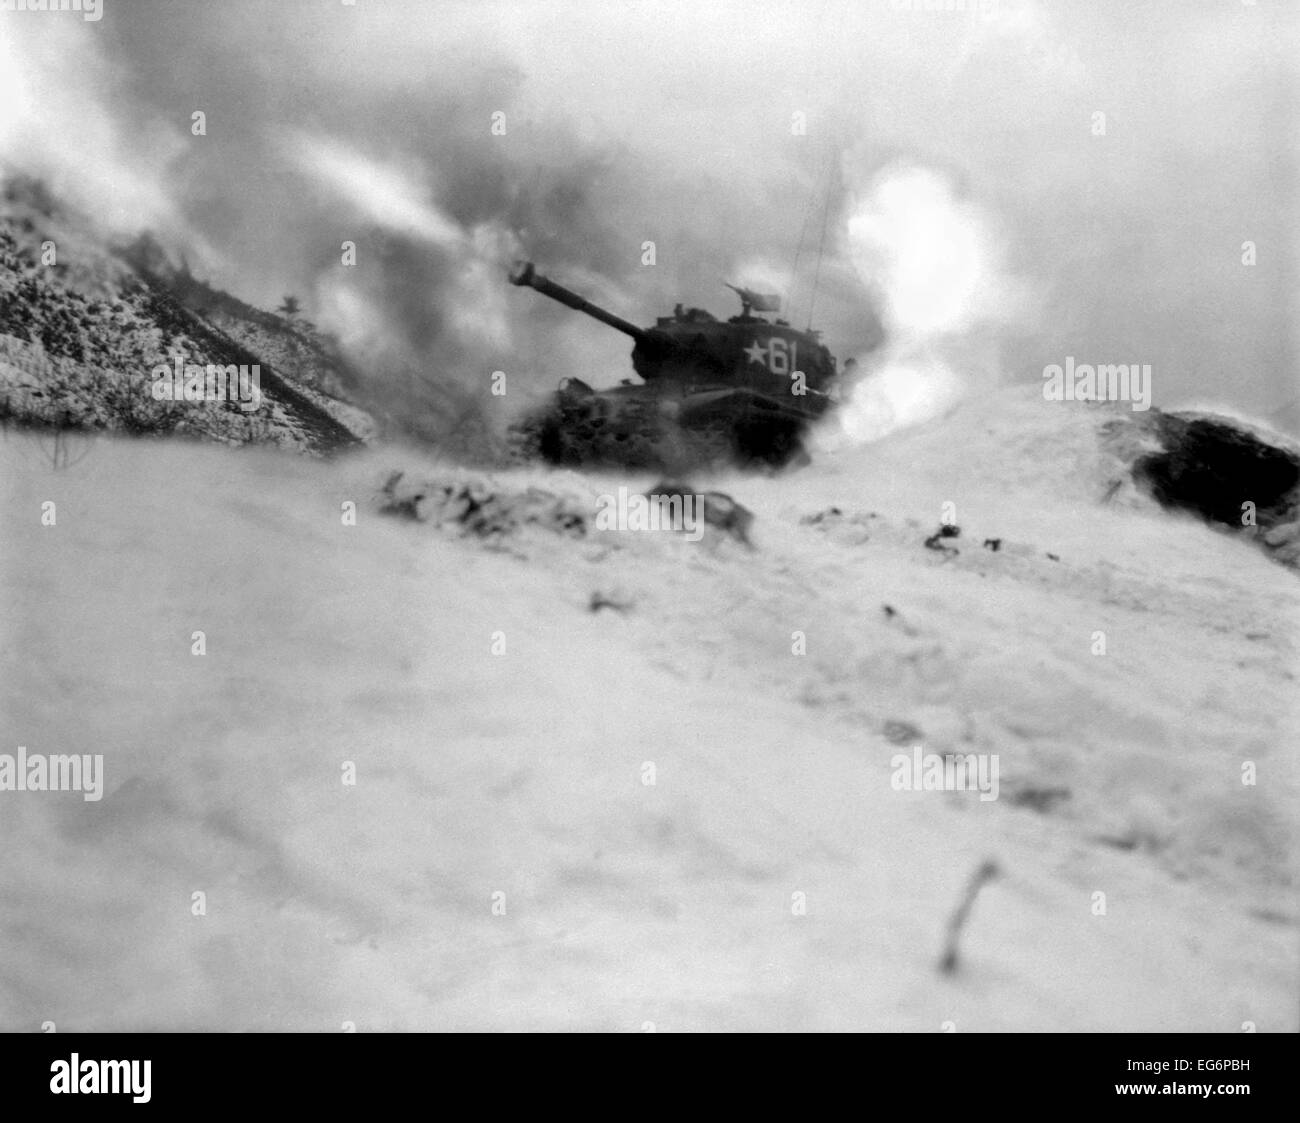 M46 tank of 6th Tank Battalion fires on enemy positions in support of the infantry near Song Sil-li, Korea. In the Korean War Stock Photo